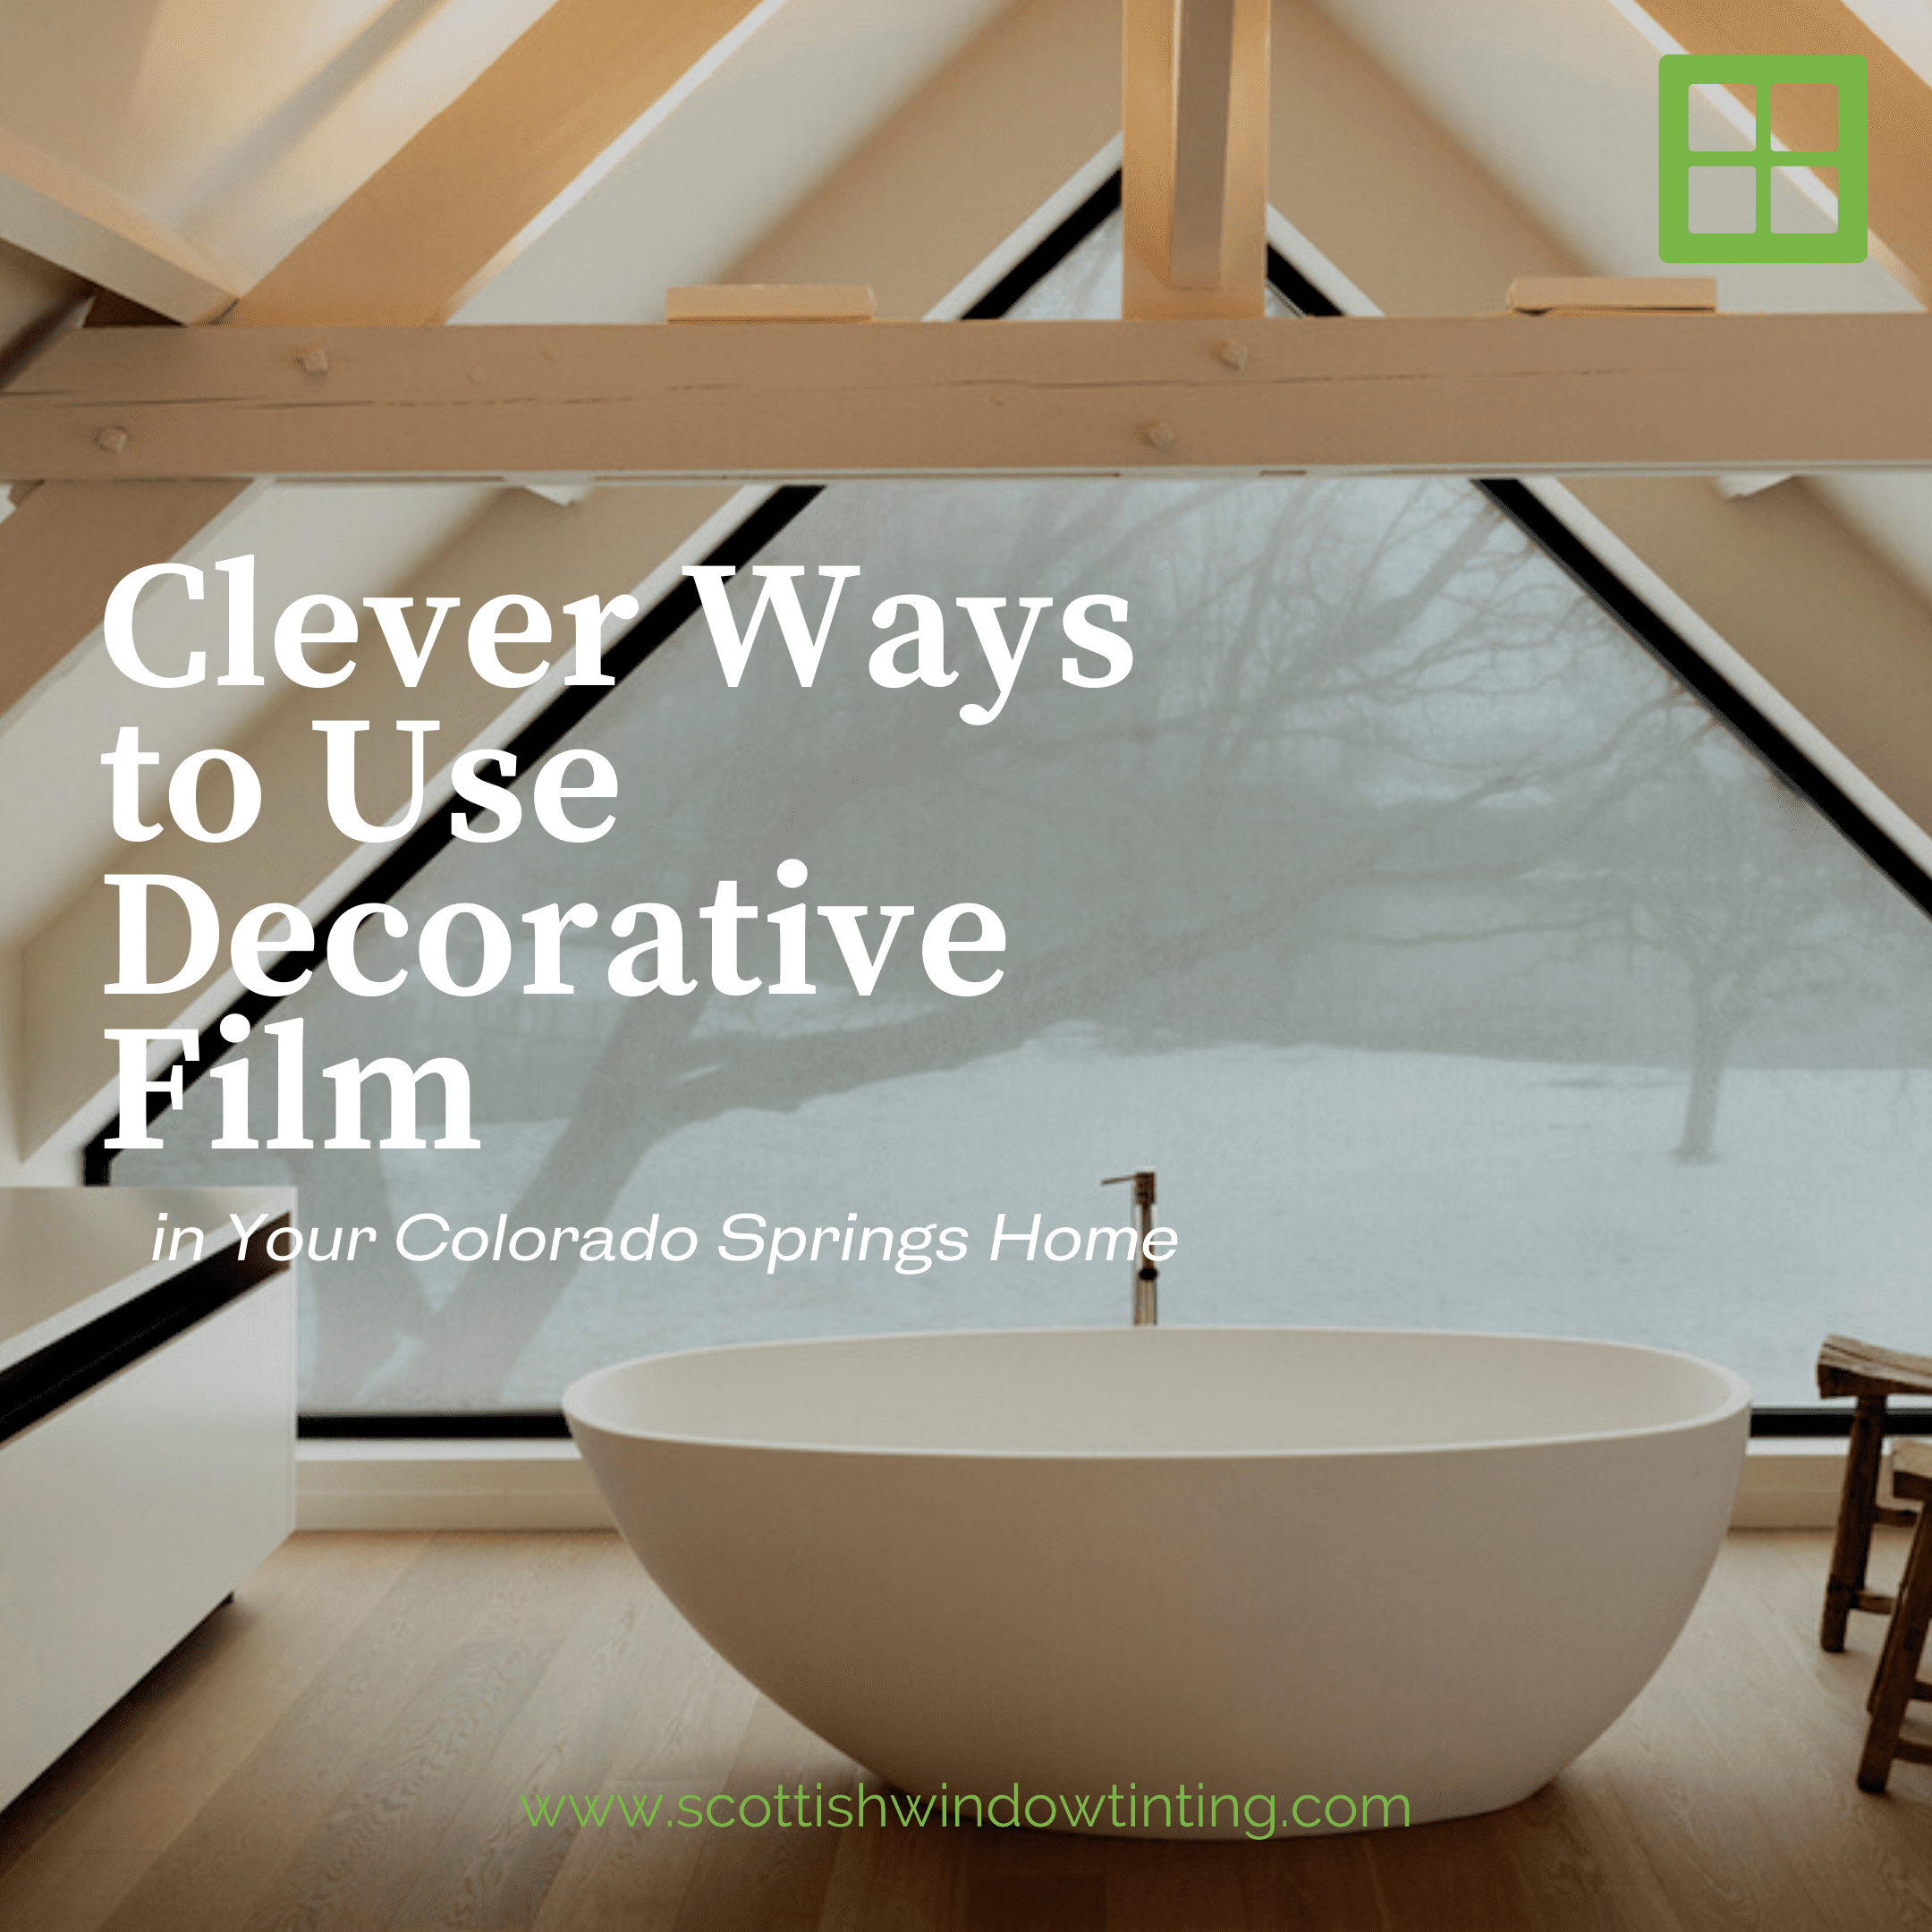 Clever Ways to Use Decorative Film in Your Colorado Springs Home